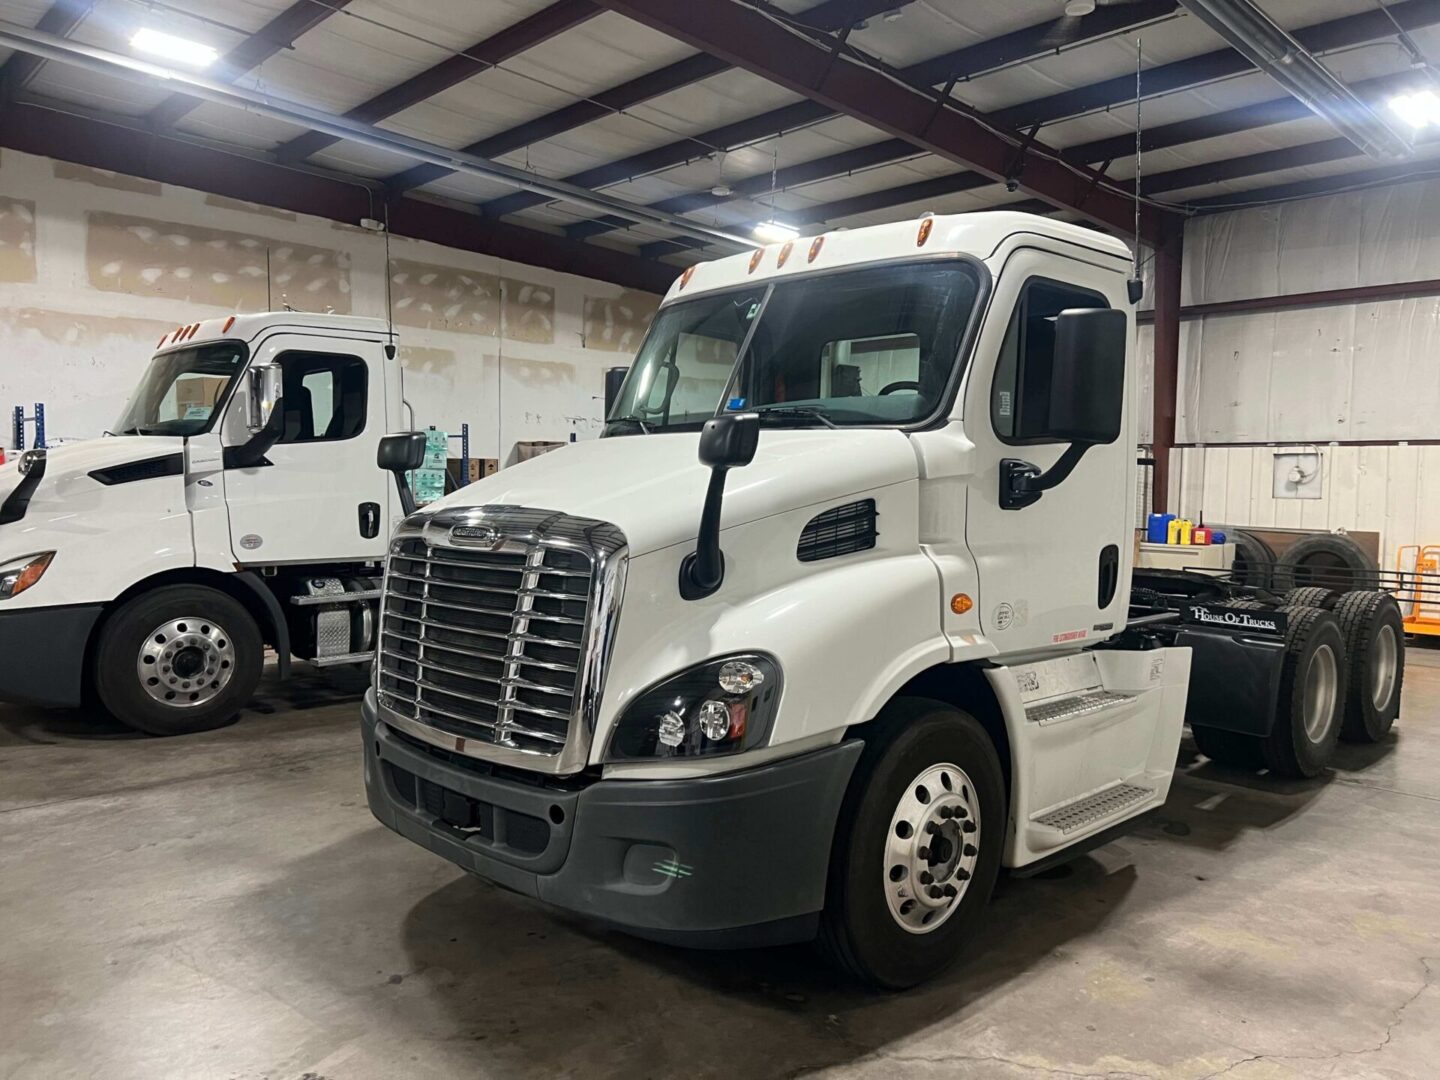 Two white trucks parked in a warehouse.